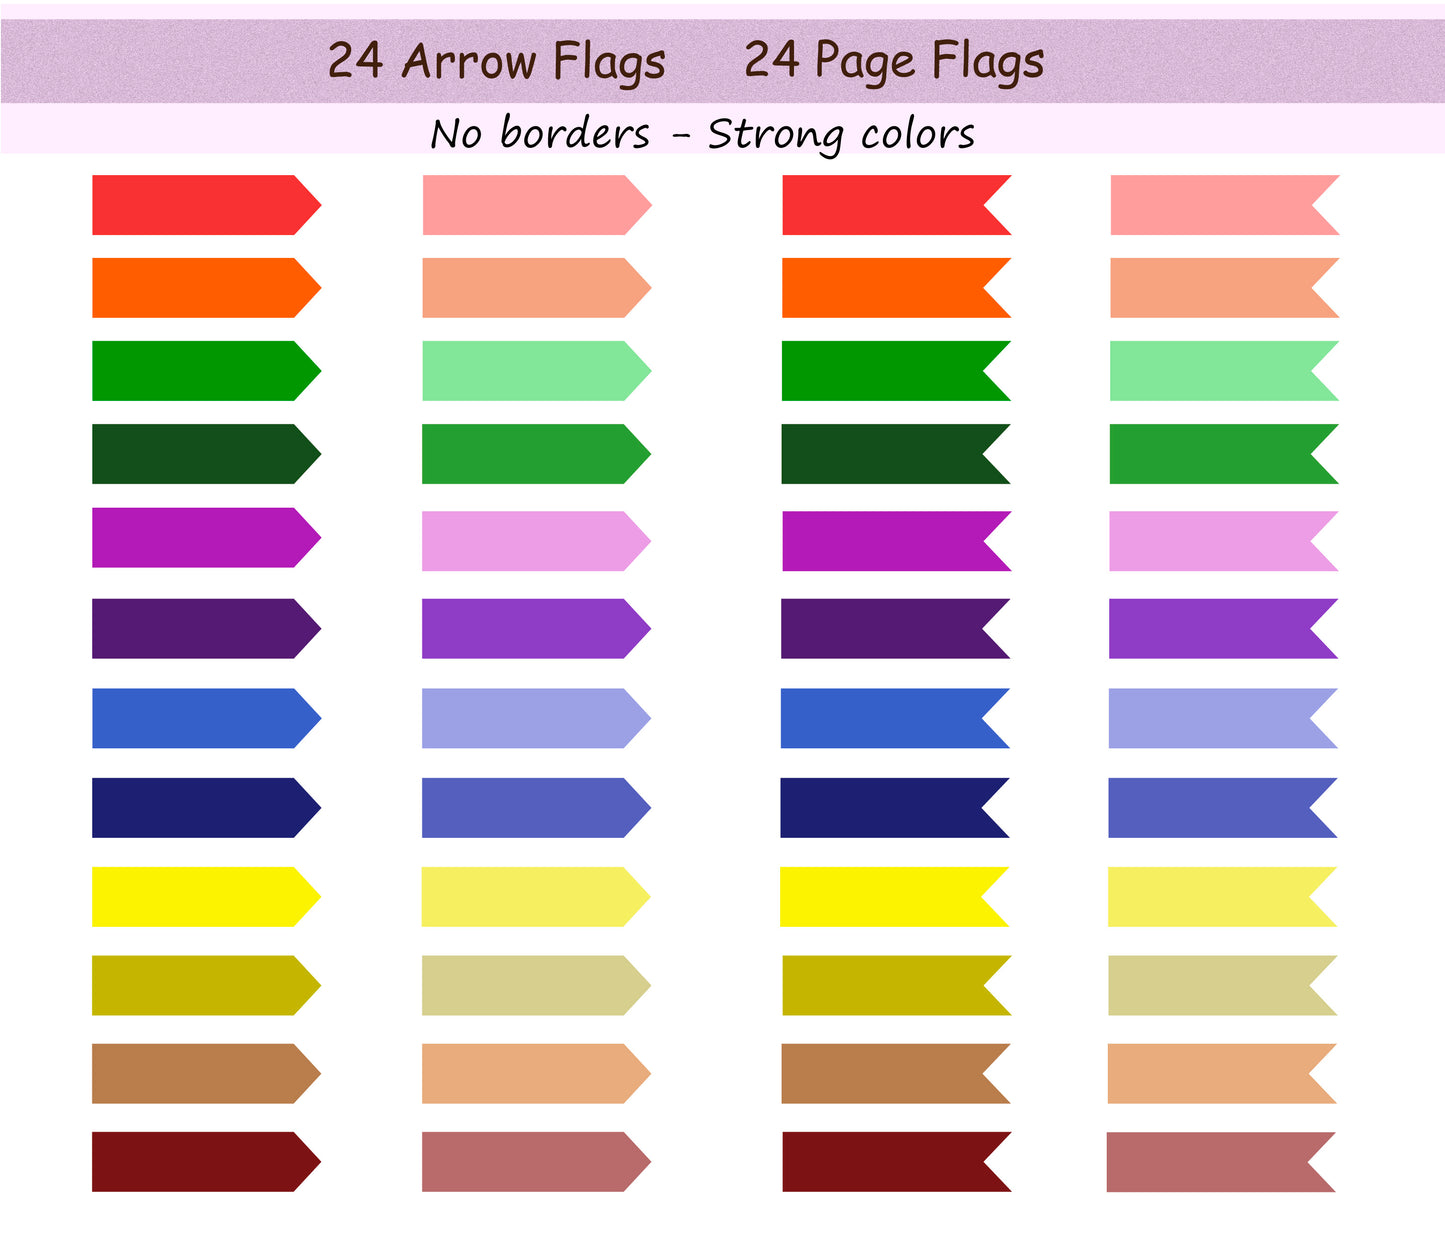 Arrow & page flags | Strong colors | NO border - Digital sticker